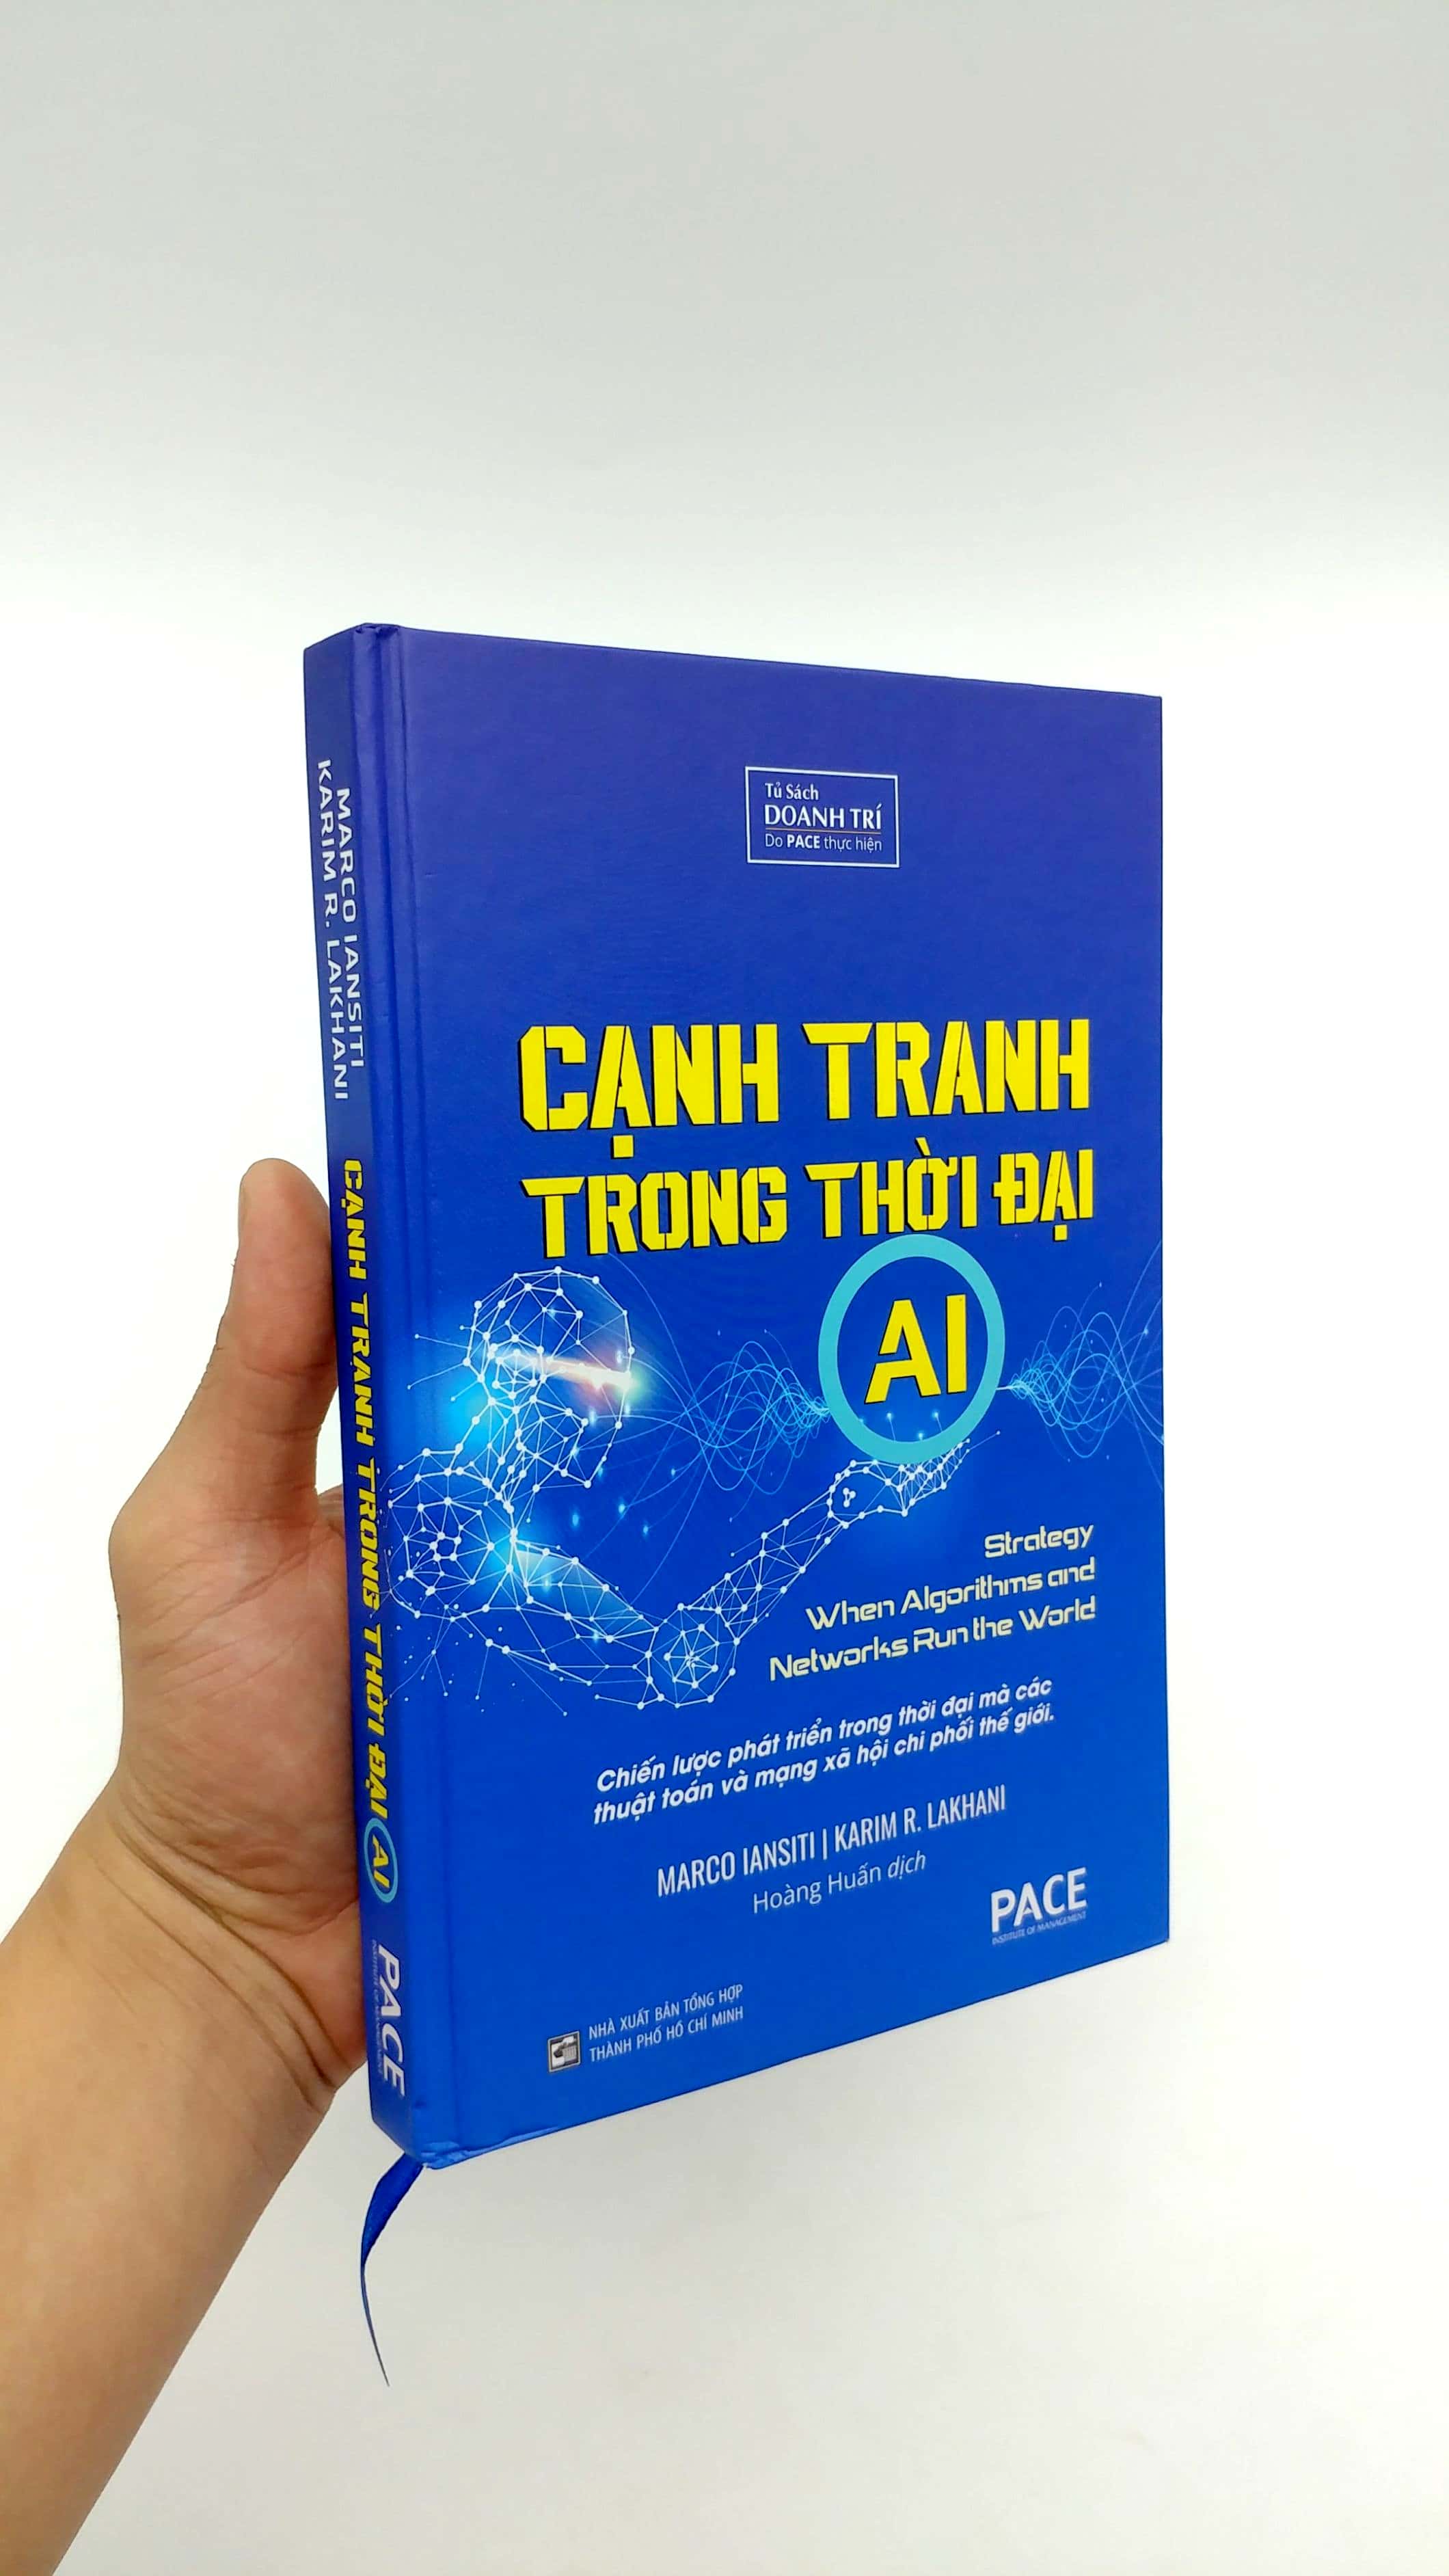 Cạnh Tranh Trong Thời Đại AI - Competing In The Age Of AI PDF